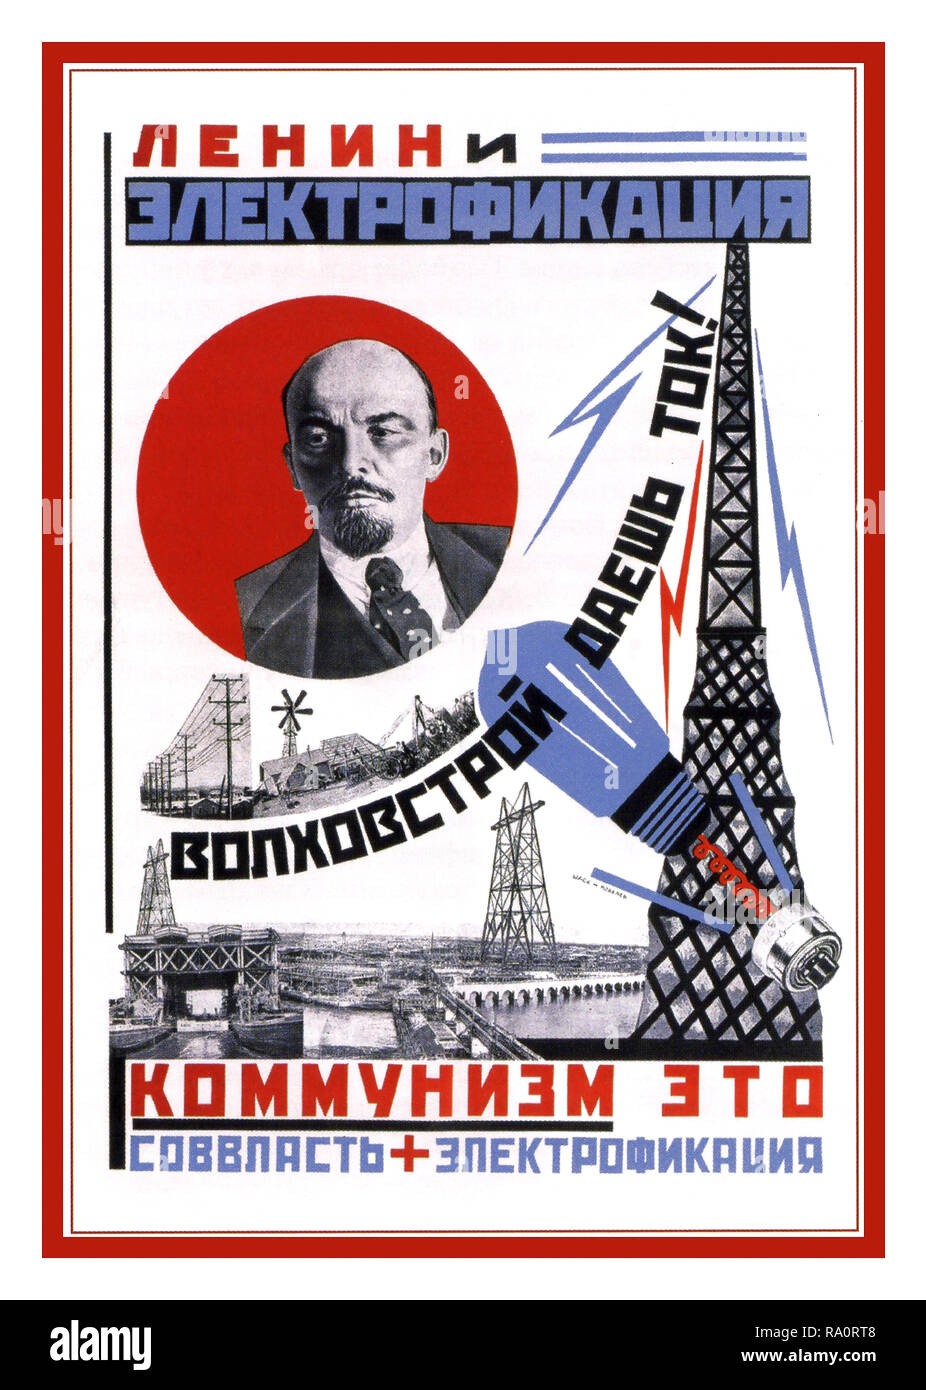 Vintage Russian Propaganda Poster  ‘Lenin and Electrification'  by Shass-Kobelev 1925  The electrified landscape promised by Lenin’s map, a mechanization made possible only by harnessing the power of the earth: “Construction of the Volkhov hydroelectric dam will give current!”  Volkhov dam to left and to the right an electric tower that sends blue lightning bolts down to a light bulb, which points toward Lenin’s image. At the bottom of the poster, formula that Lenin delivered at the launching of the electrification campaign in 1920: Soviet Power + Electrification = Communism Stock Photo